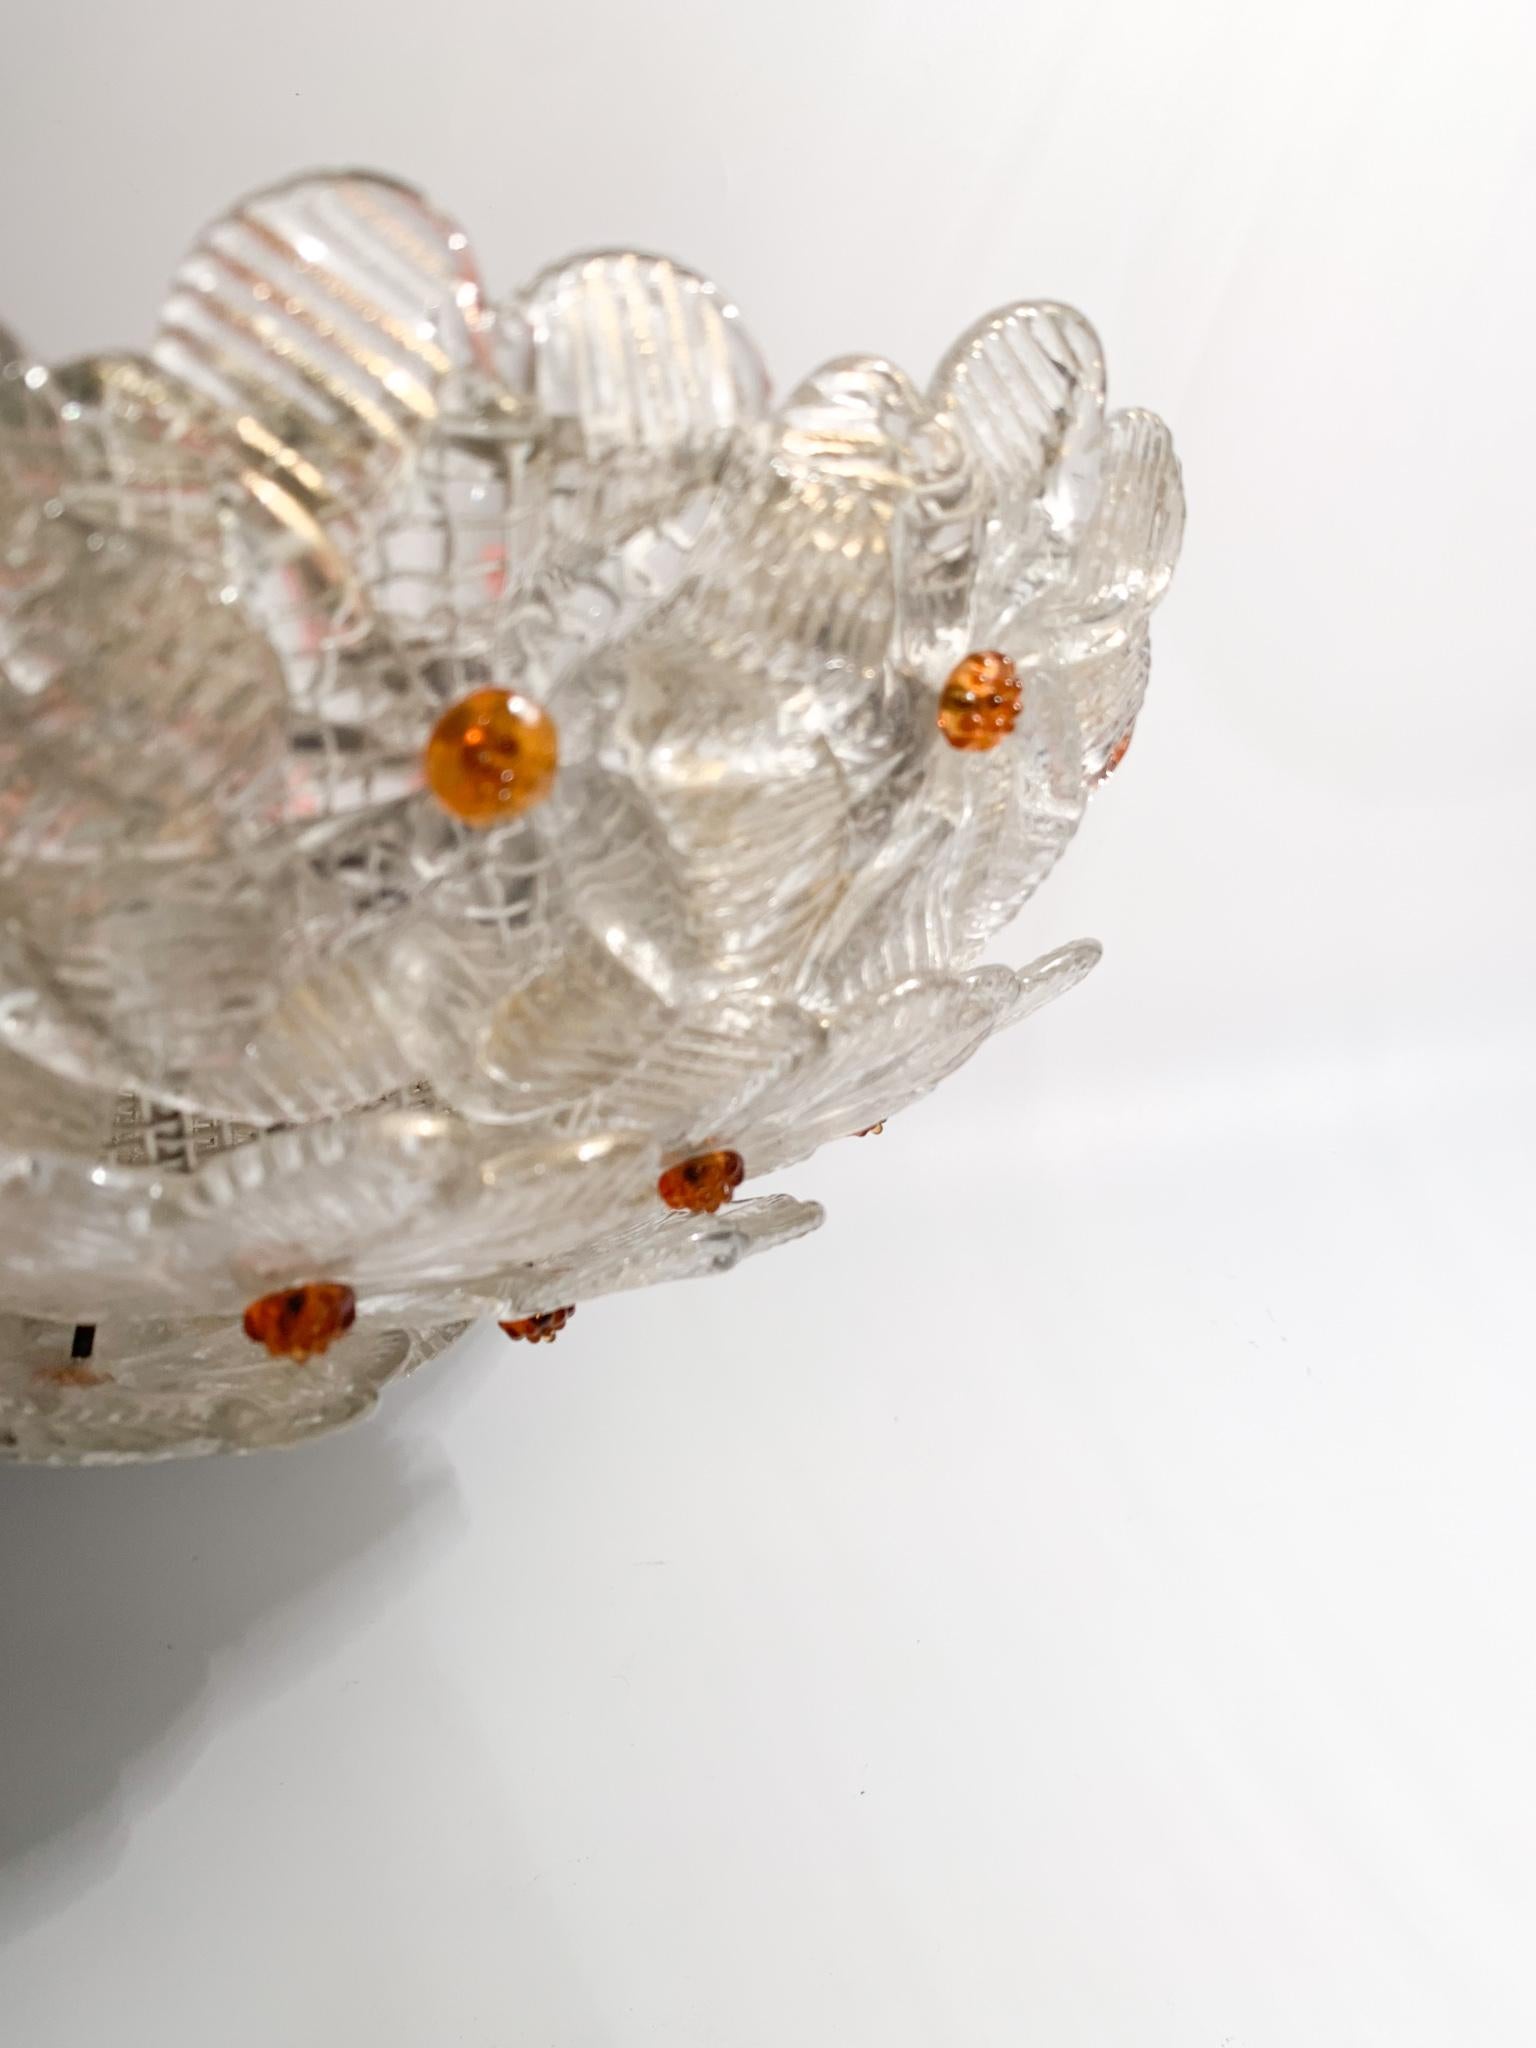 Millefiori Ceiling Light by Barovier & Toso in Murano Glass from the 1950s 1